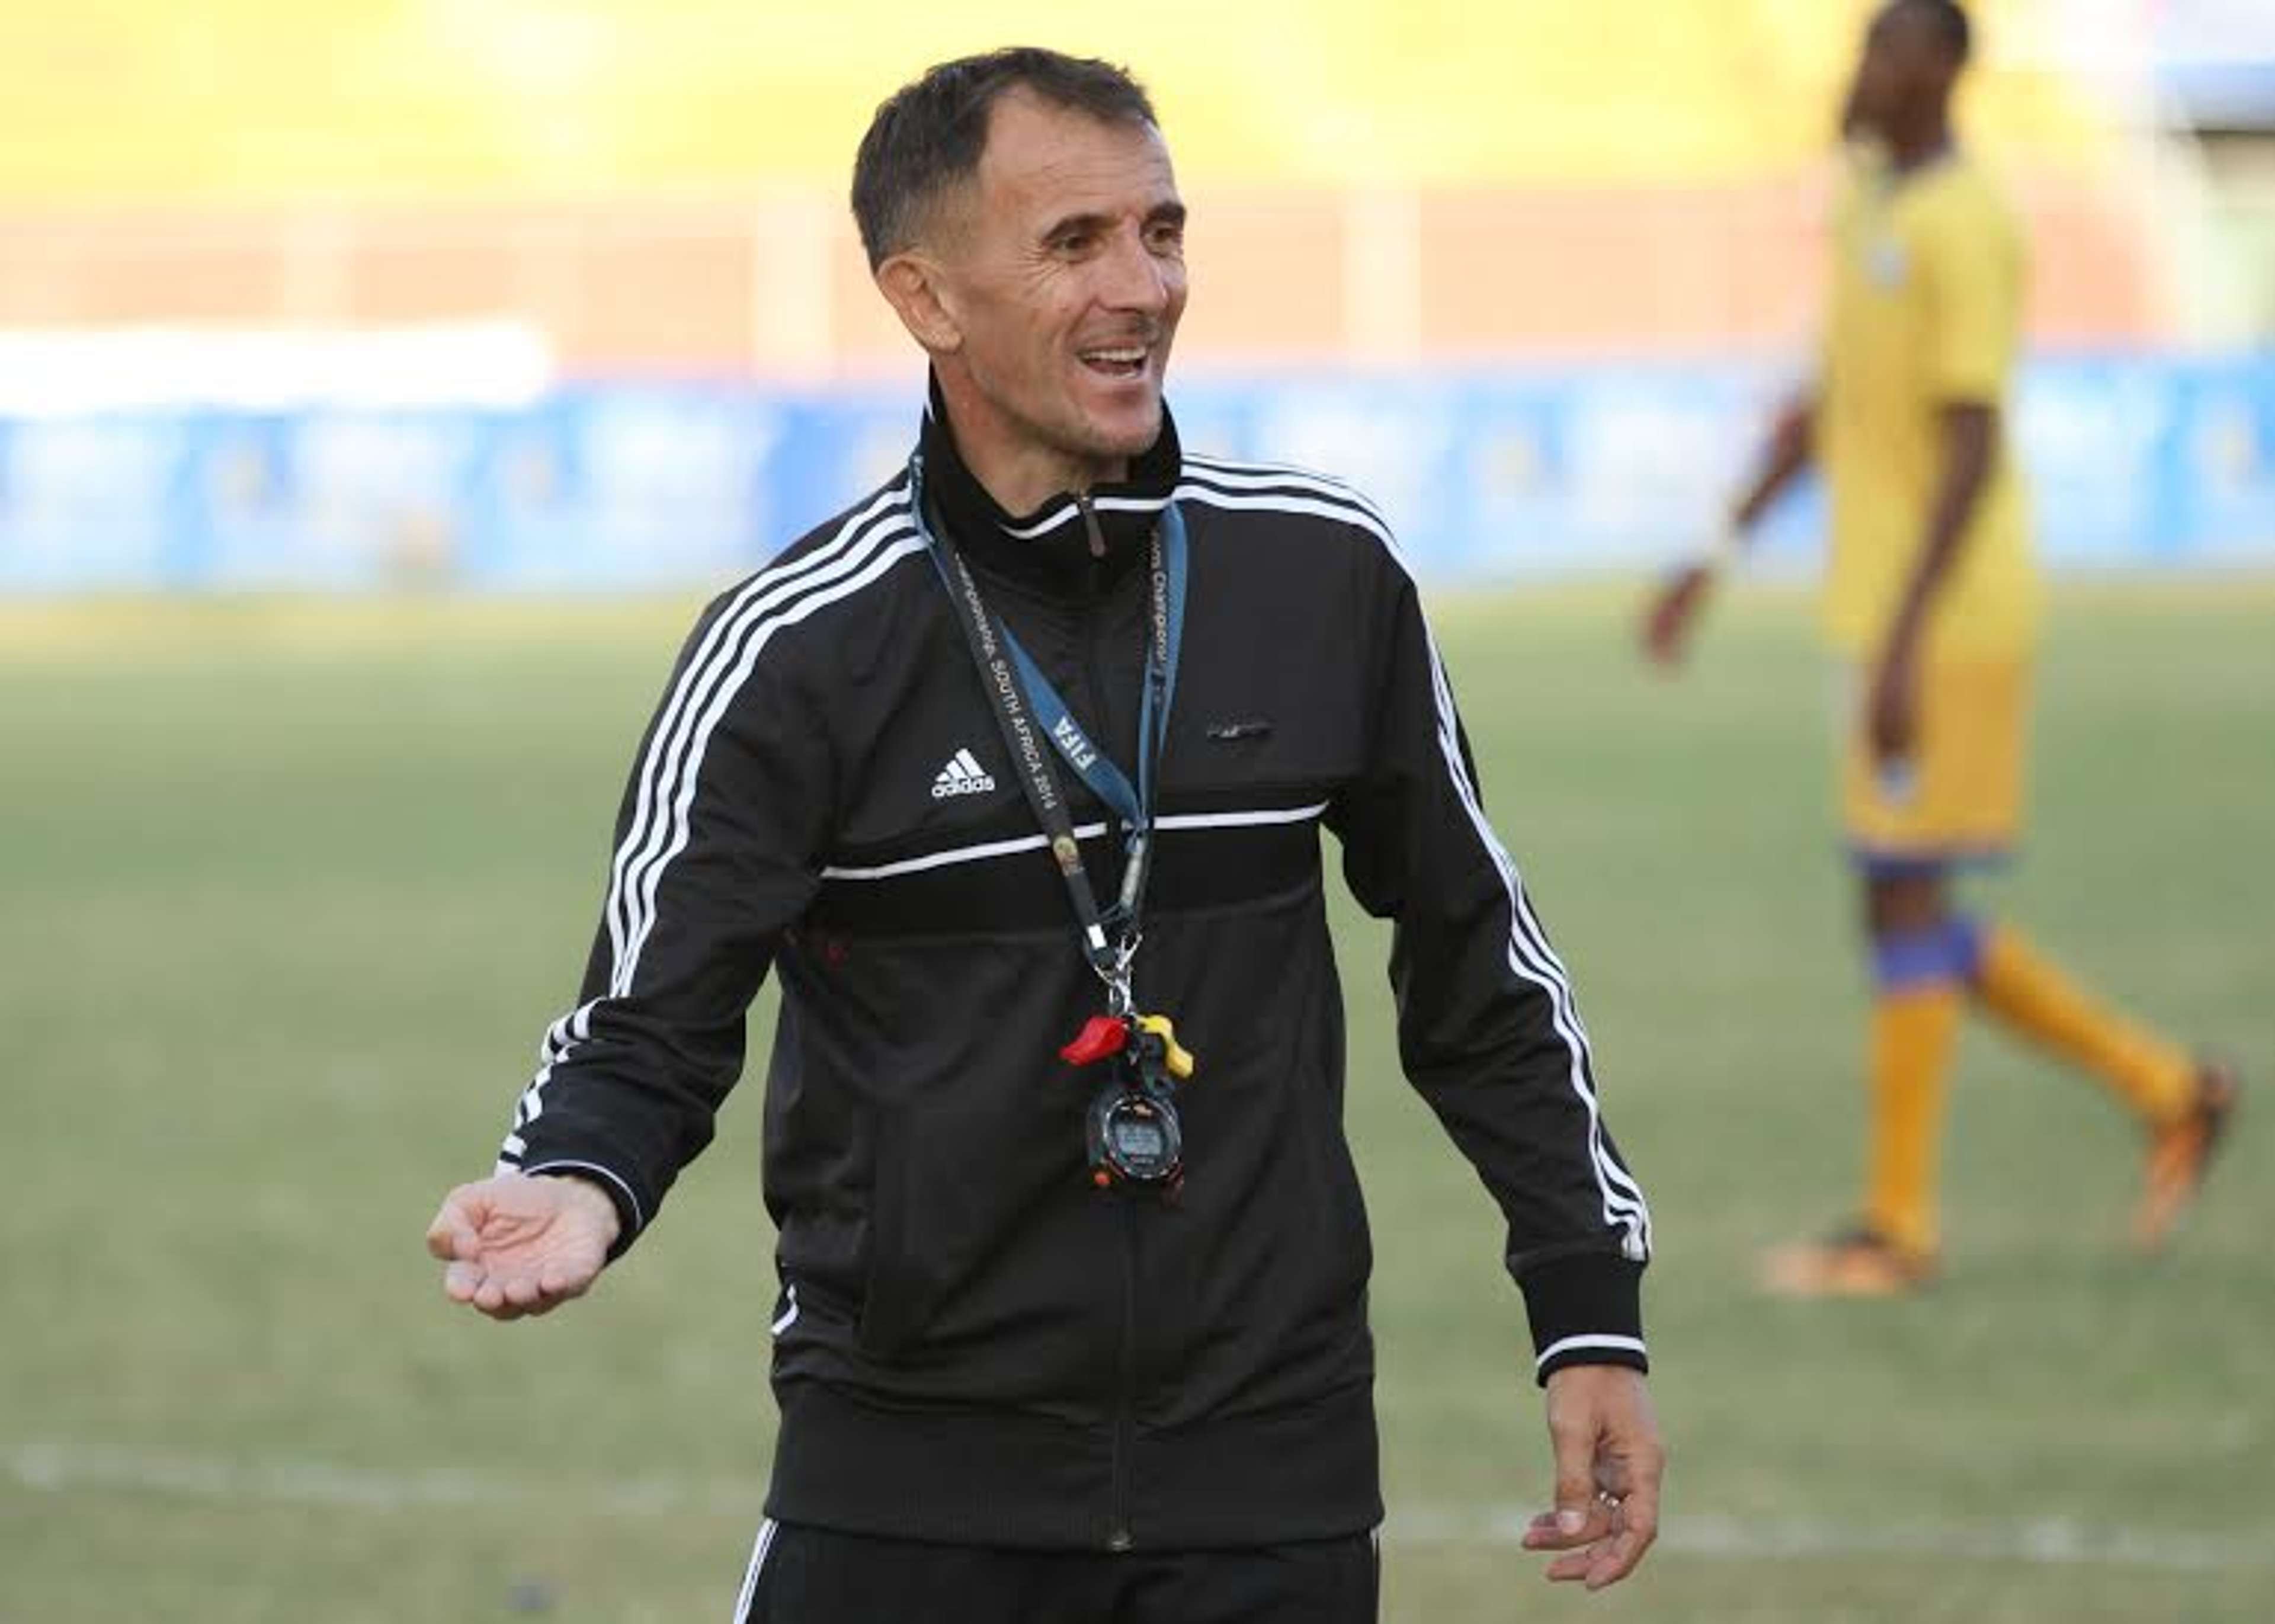 Uganda coach 'Micho' praised his charges for winning a record fourteenth title